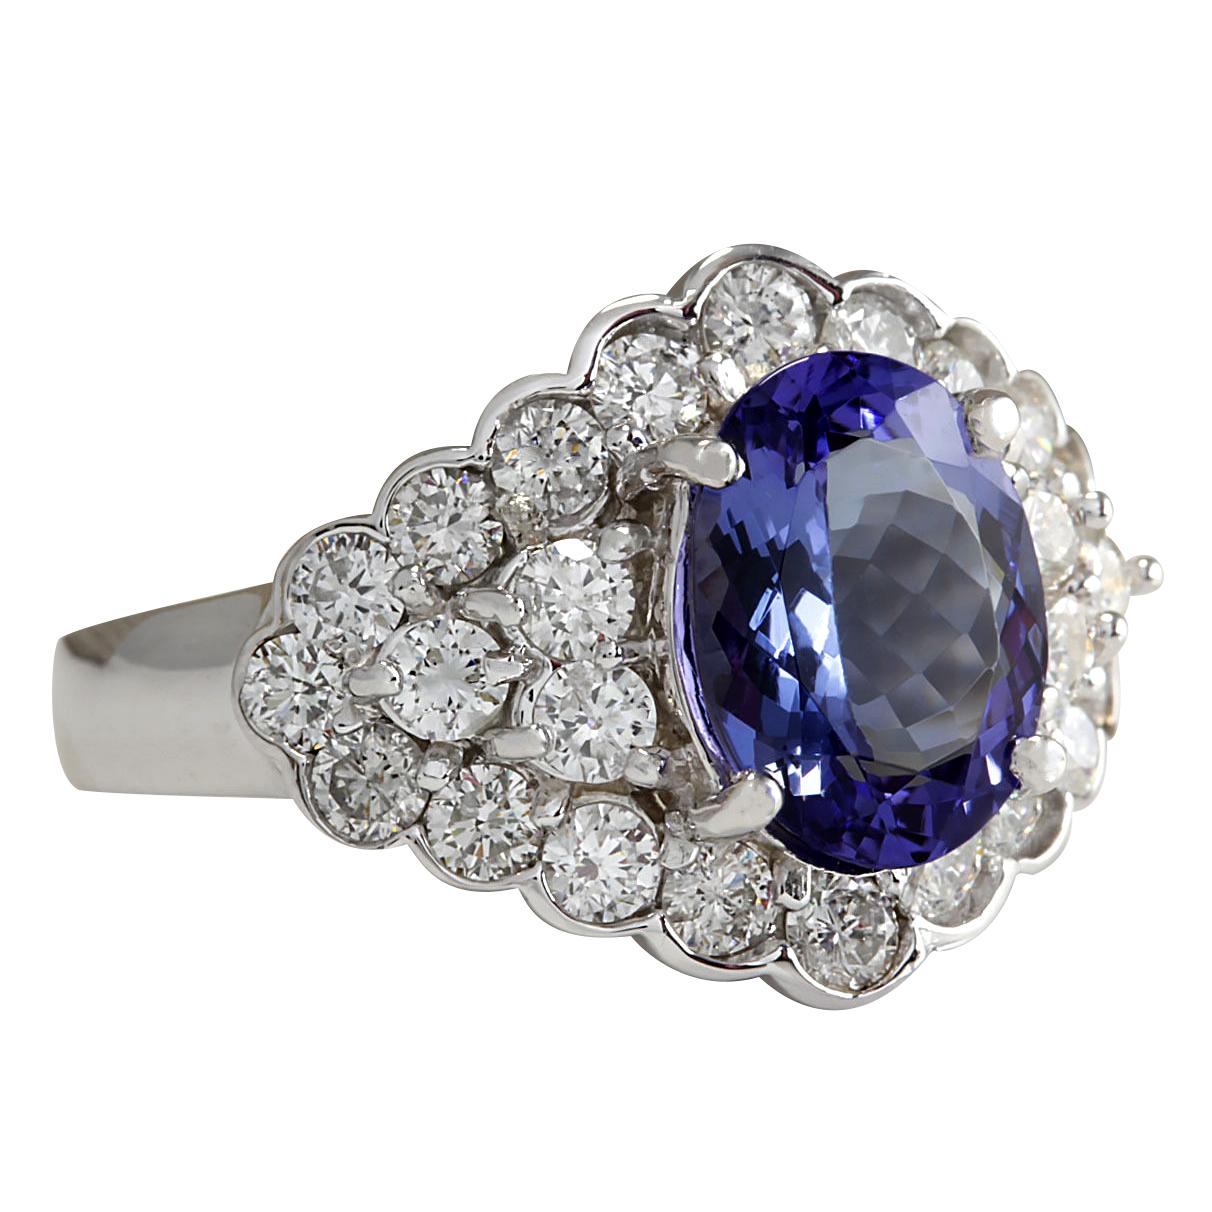 Stamped: 18K White Gold
Total Ring Weight: 8.5 Grams
Ring Length: N/A
Ring Width: N/A
Gemstone Weight: Total  Tanzanite Weight is 3.32 Carat (Measures: 11.25x8.83 mm)
Color: Blue
Diamond Weight: Total  Diamond Weight is 1.80 Carat
Color: F-G,